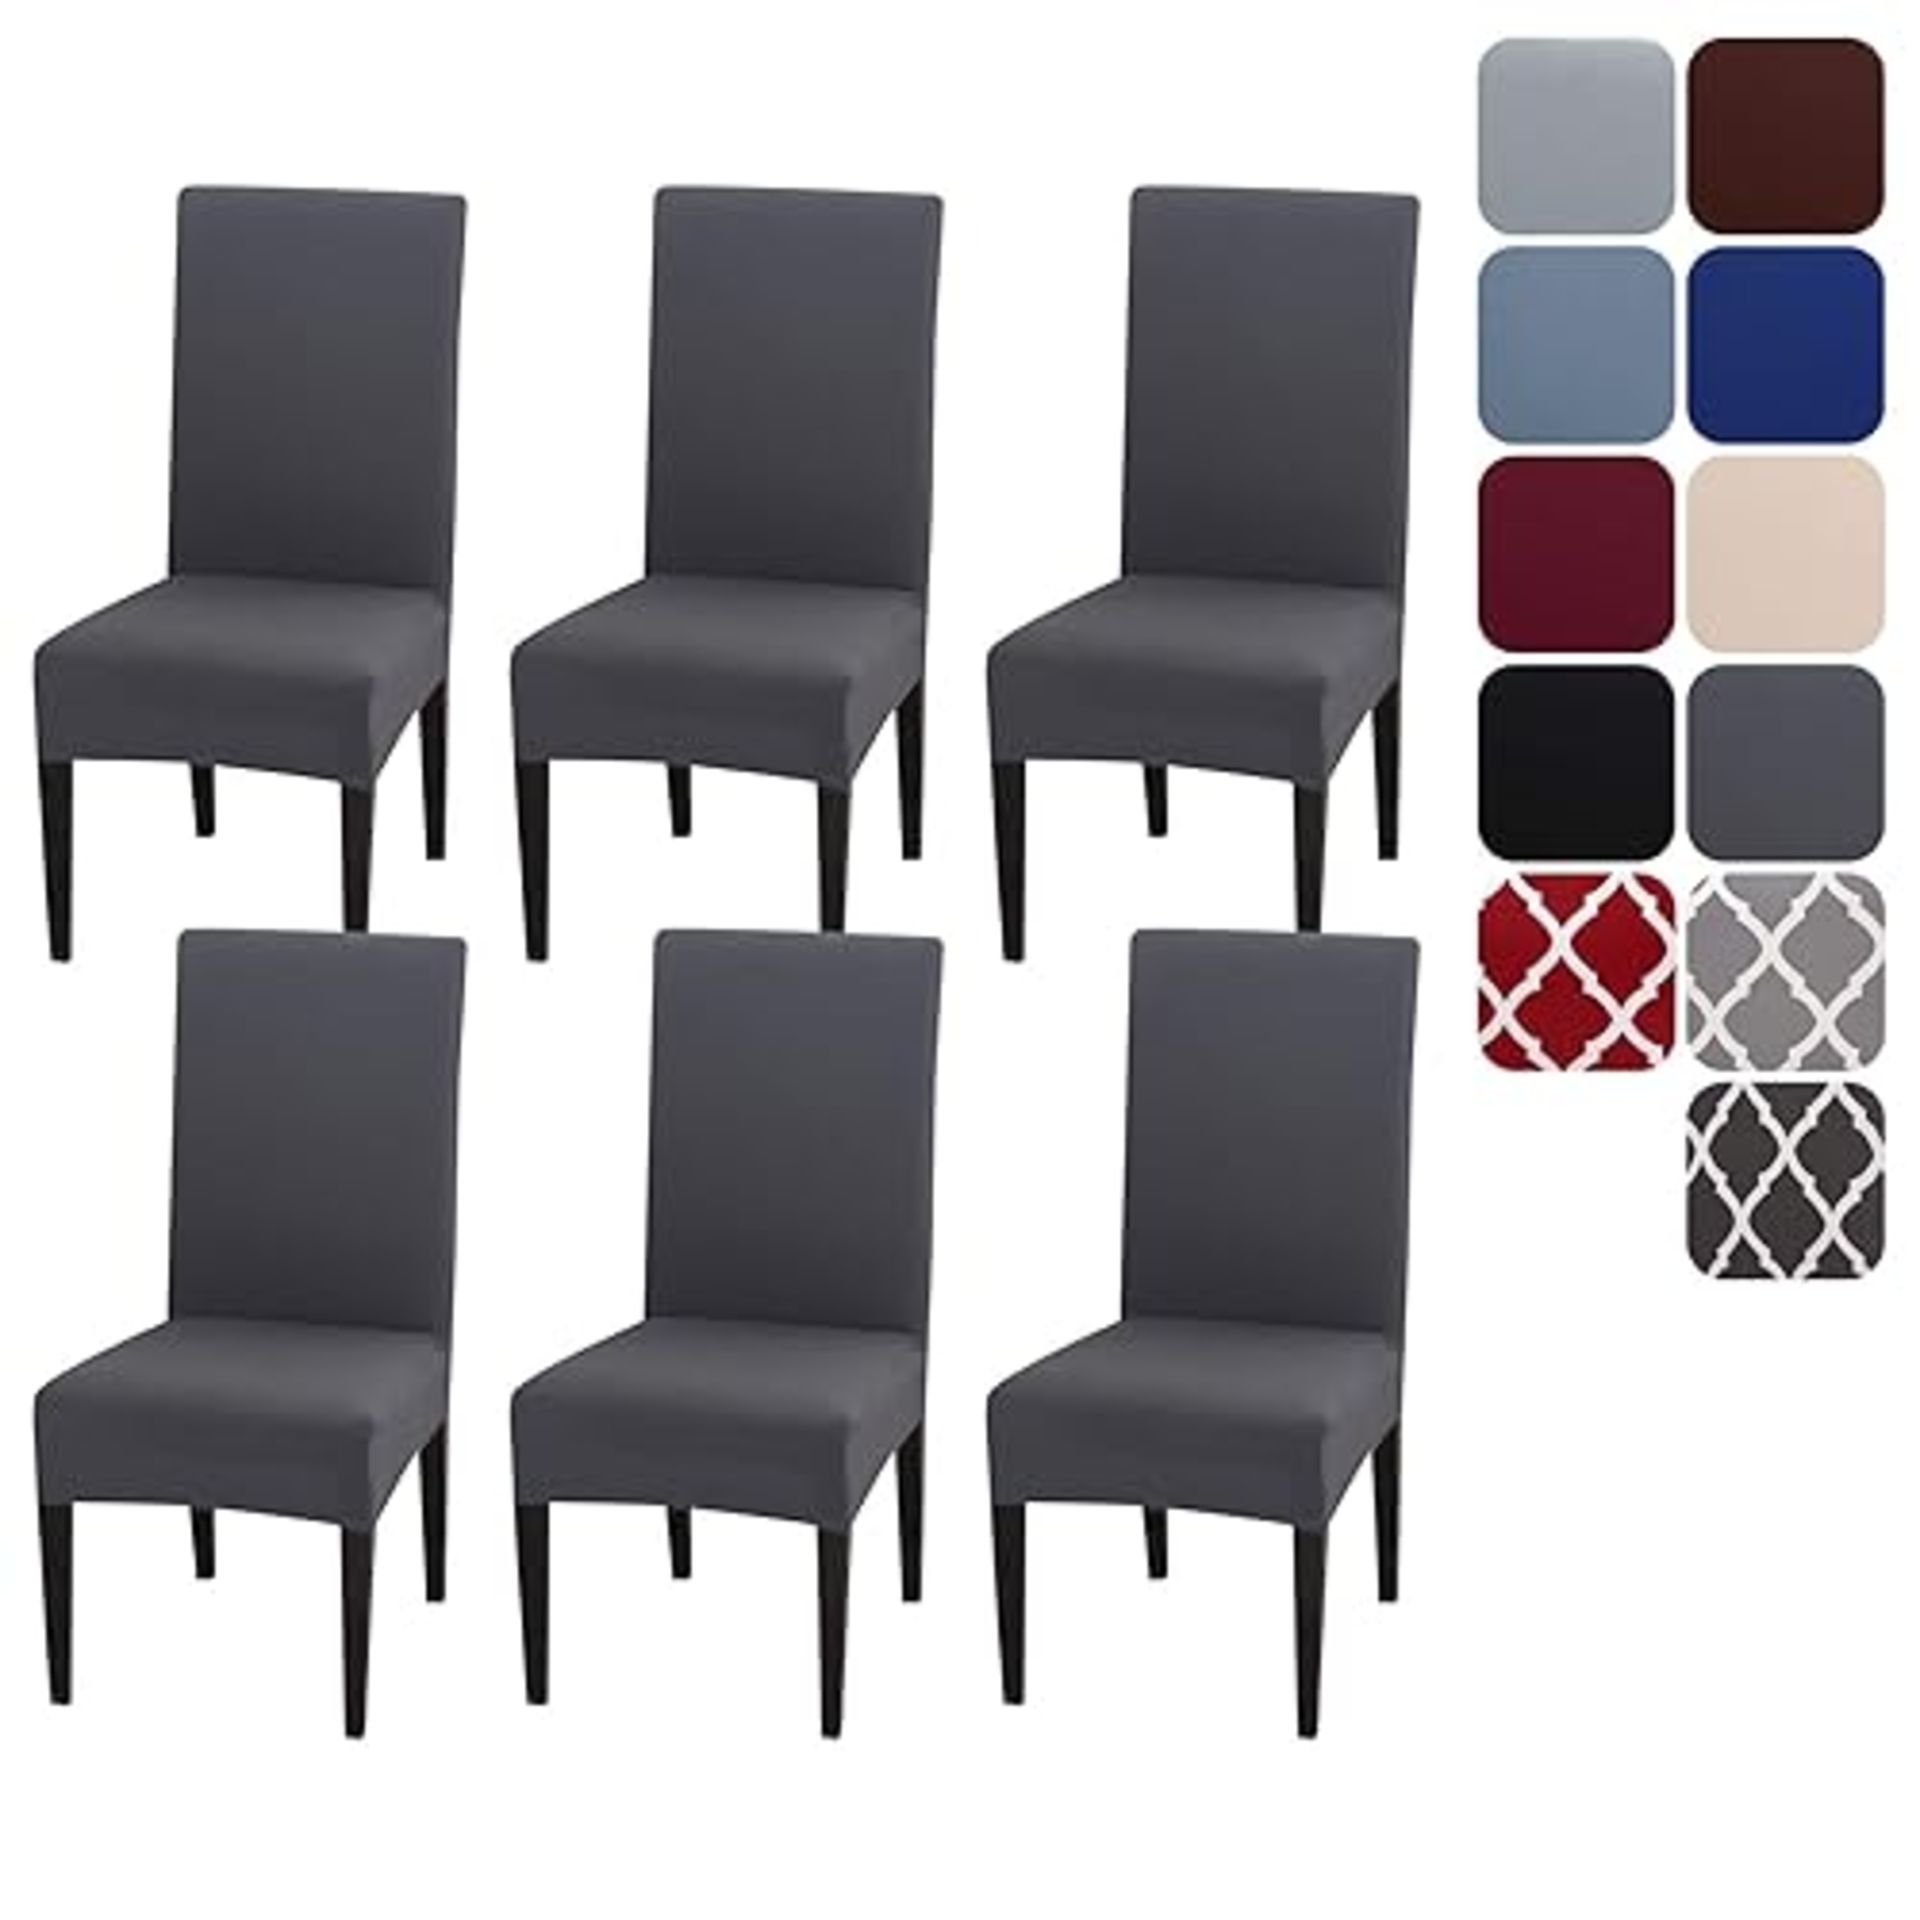 Aisprts Dining Room Chair Covers Slipcovers Set of 4 or 6, Stretch Removable Washable Dining Chair 